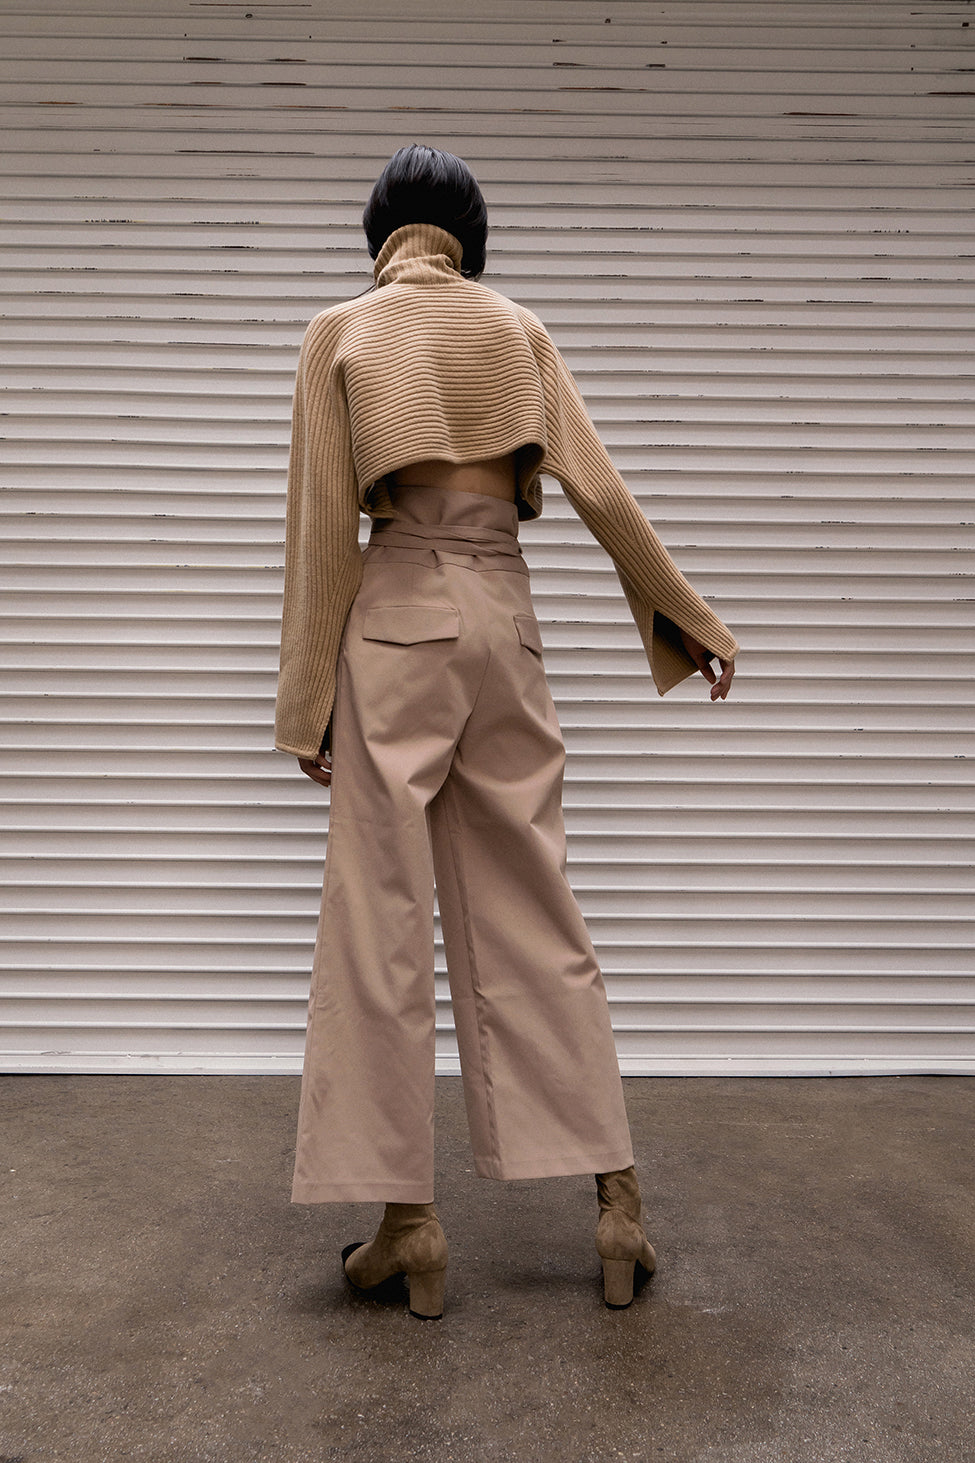 The Kasumi easy trousers in beige featuring high rise, gathered elastic paperboy waist with non-detachable tie-belt. One-seam back pockets. Pleats from front waist. Concealed zip closure at side. Relaxed straight leg. Full-length. Casual fit.